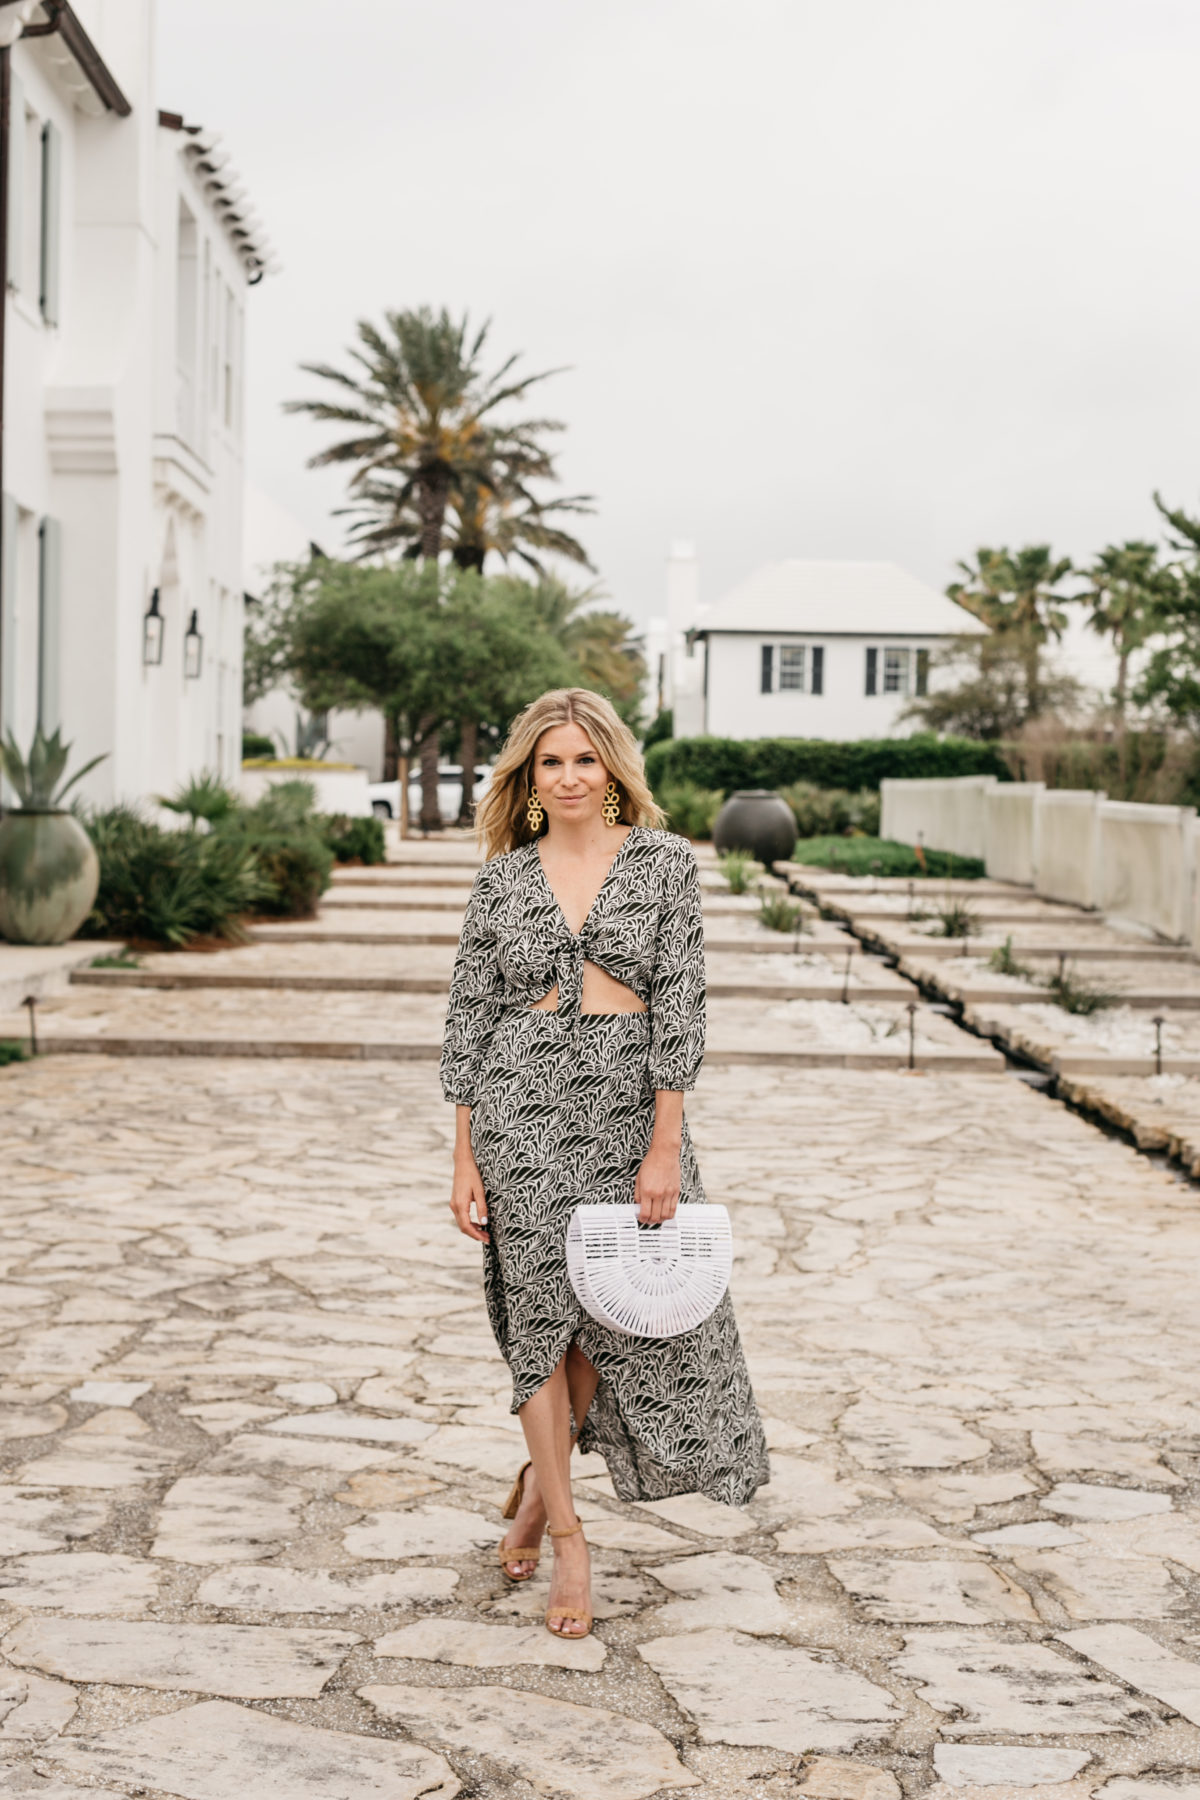 Summer outfit featured at ROSEMARY BEACH 30A